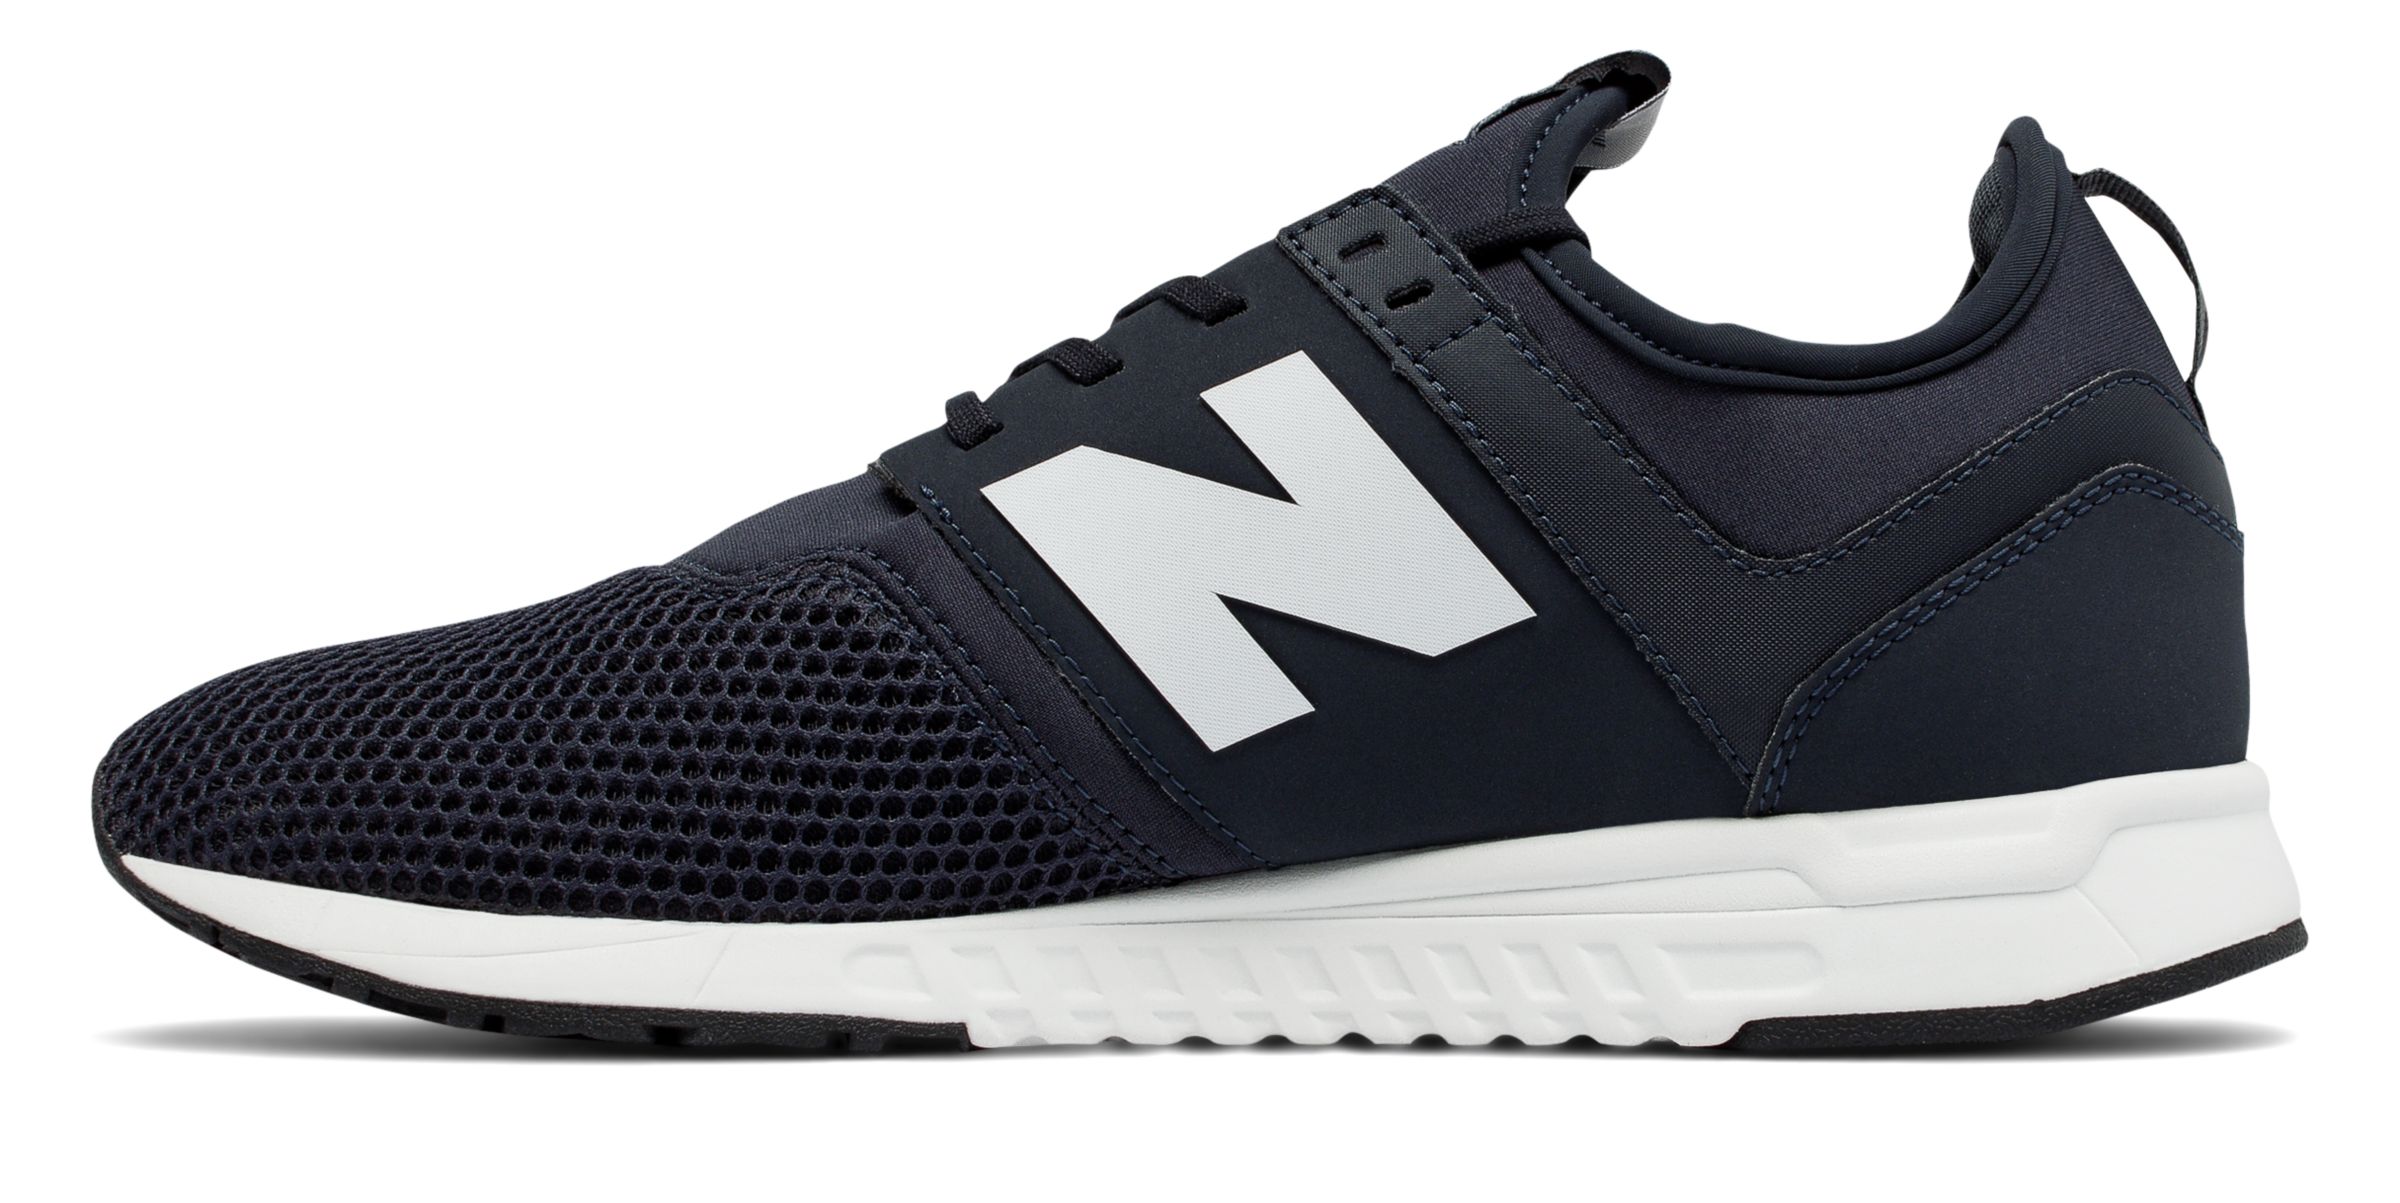 New Balance MRL247-C on Sale - Discounts Up to 58% Off on MRL247RB at Joe's New  Balance Outlet